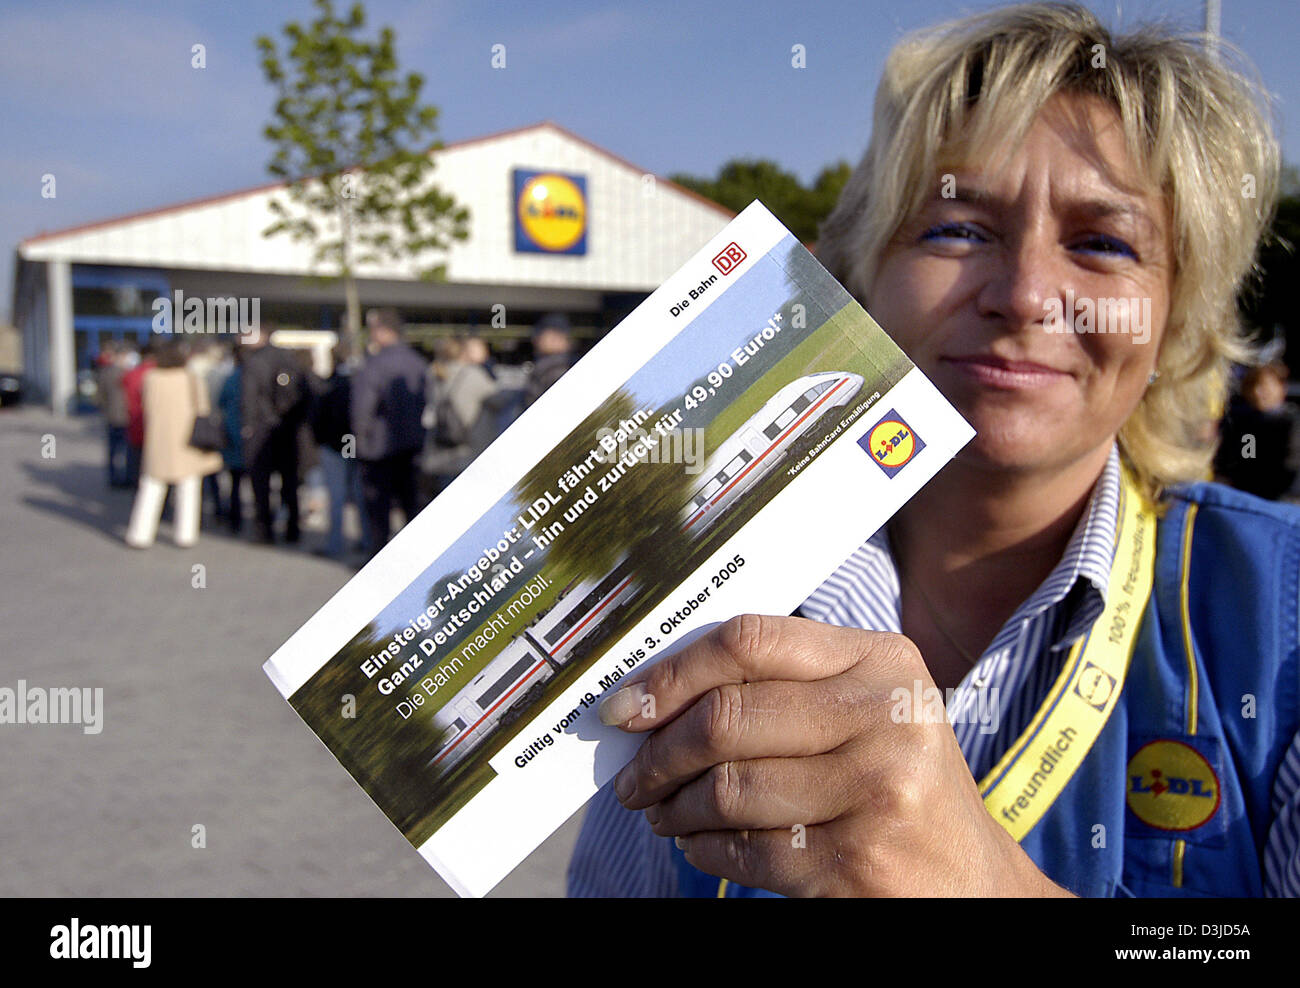 (dpa) - Sales assistant Ramona Wienholz presents a train ticket as she stand in front of a branch of German discount retailer Lidl in Augsburg, Germany, Thursday, 19 May 2005. A group of customer queue outside the entrance.  Lidl stores are now selling train tickets for the first time. In some of the company's branches the tickets went out of stock within minutes. Stock Photo